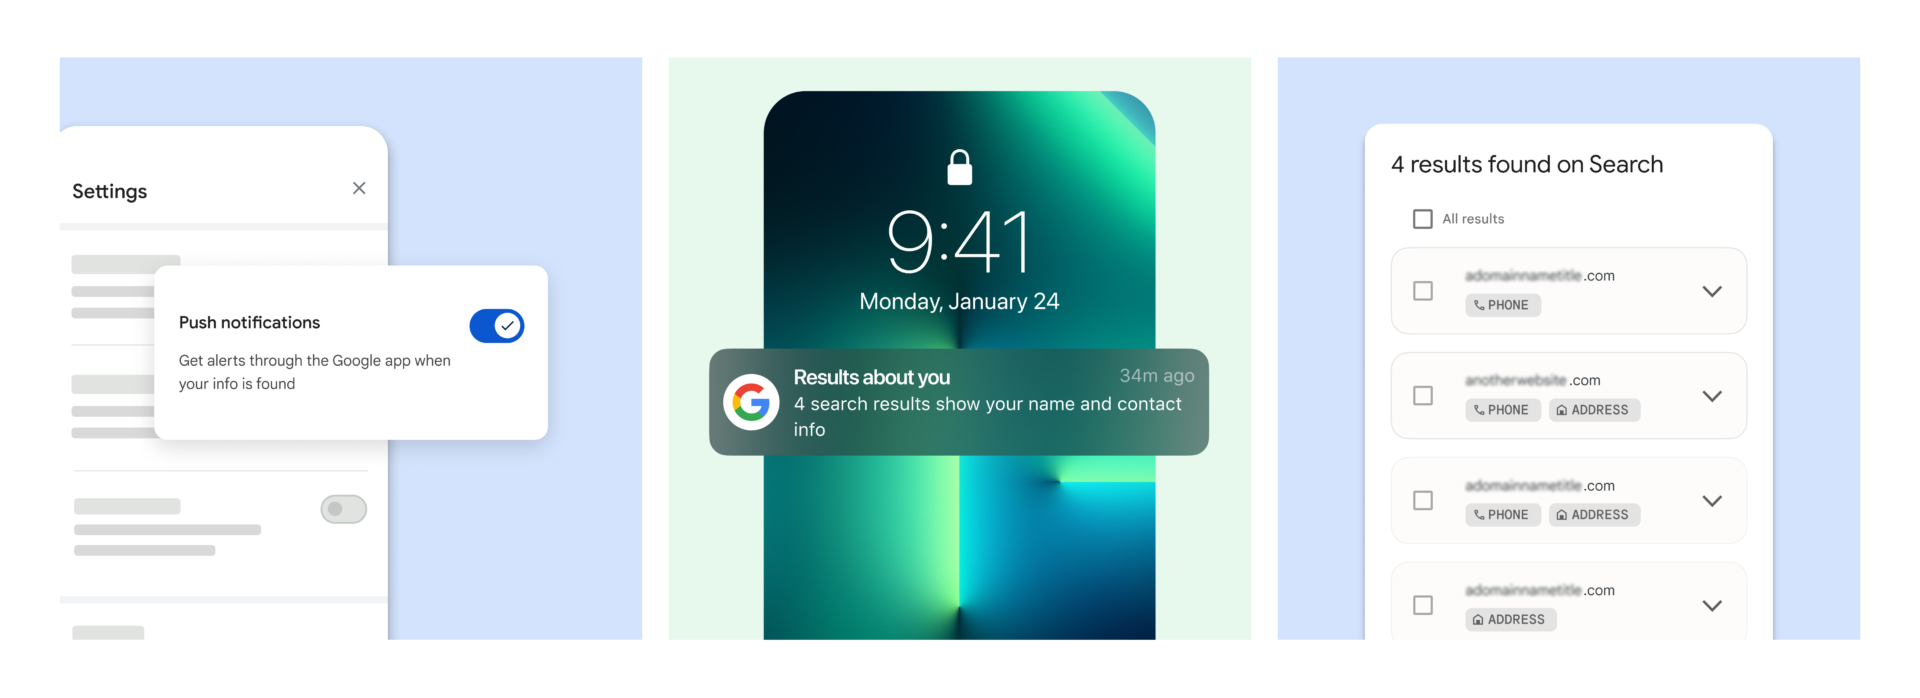 Google Enhances Privacy Tools To Protect Personal Data